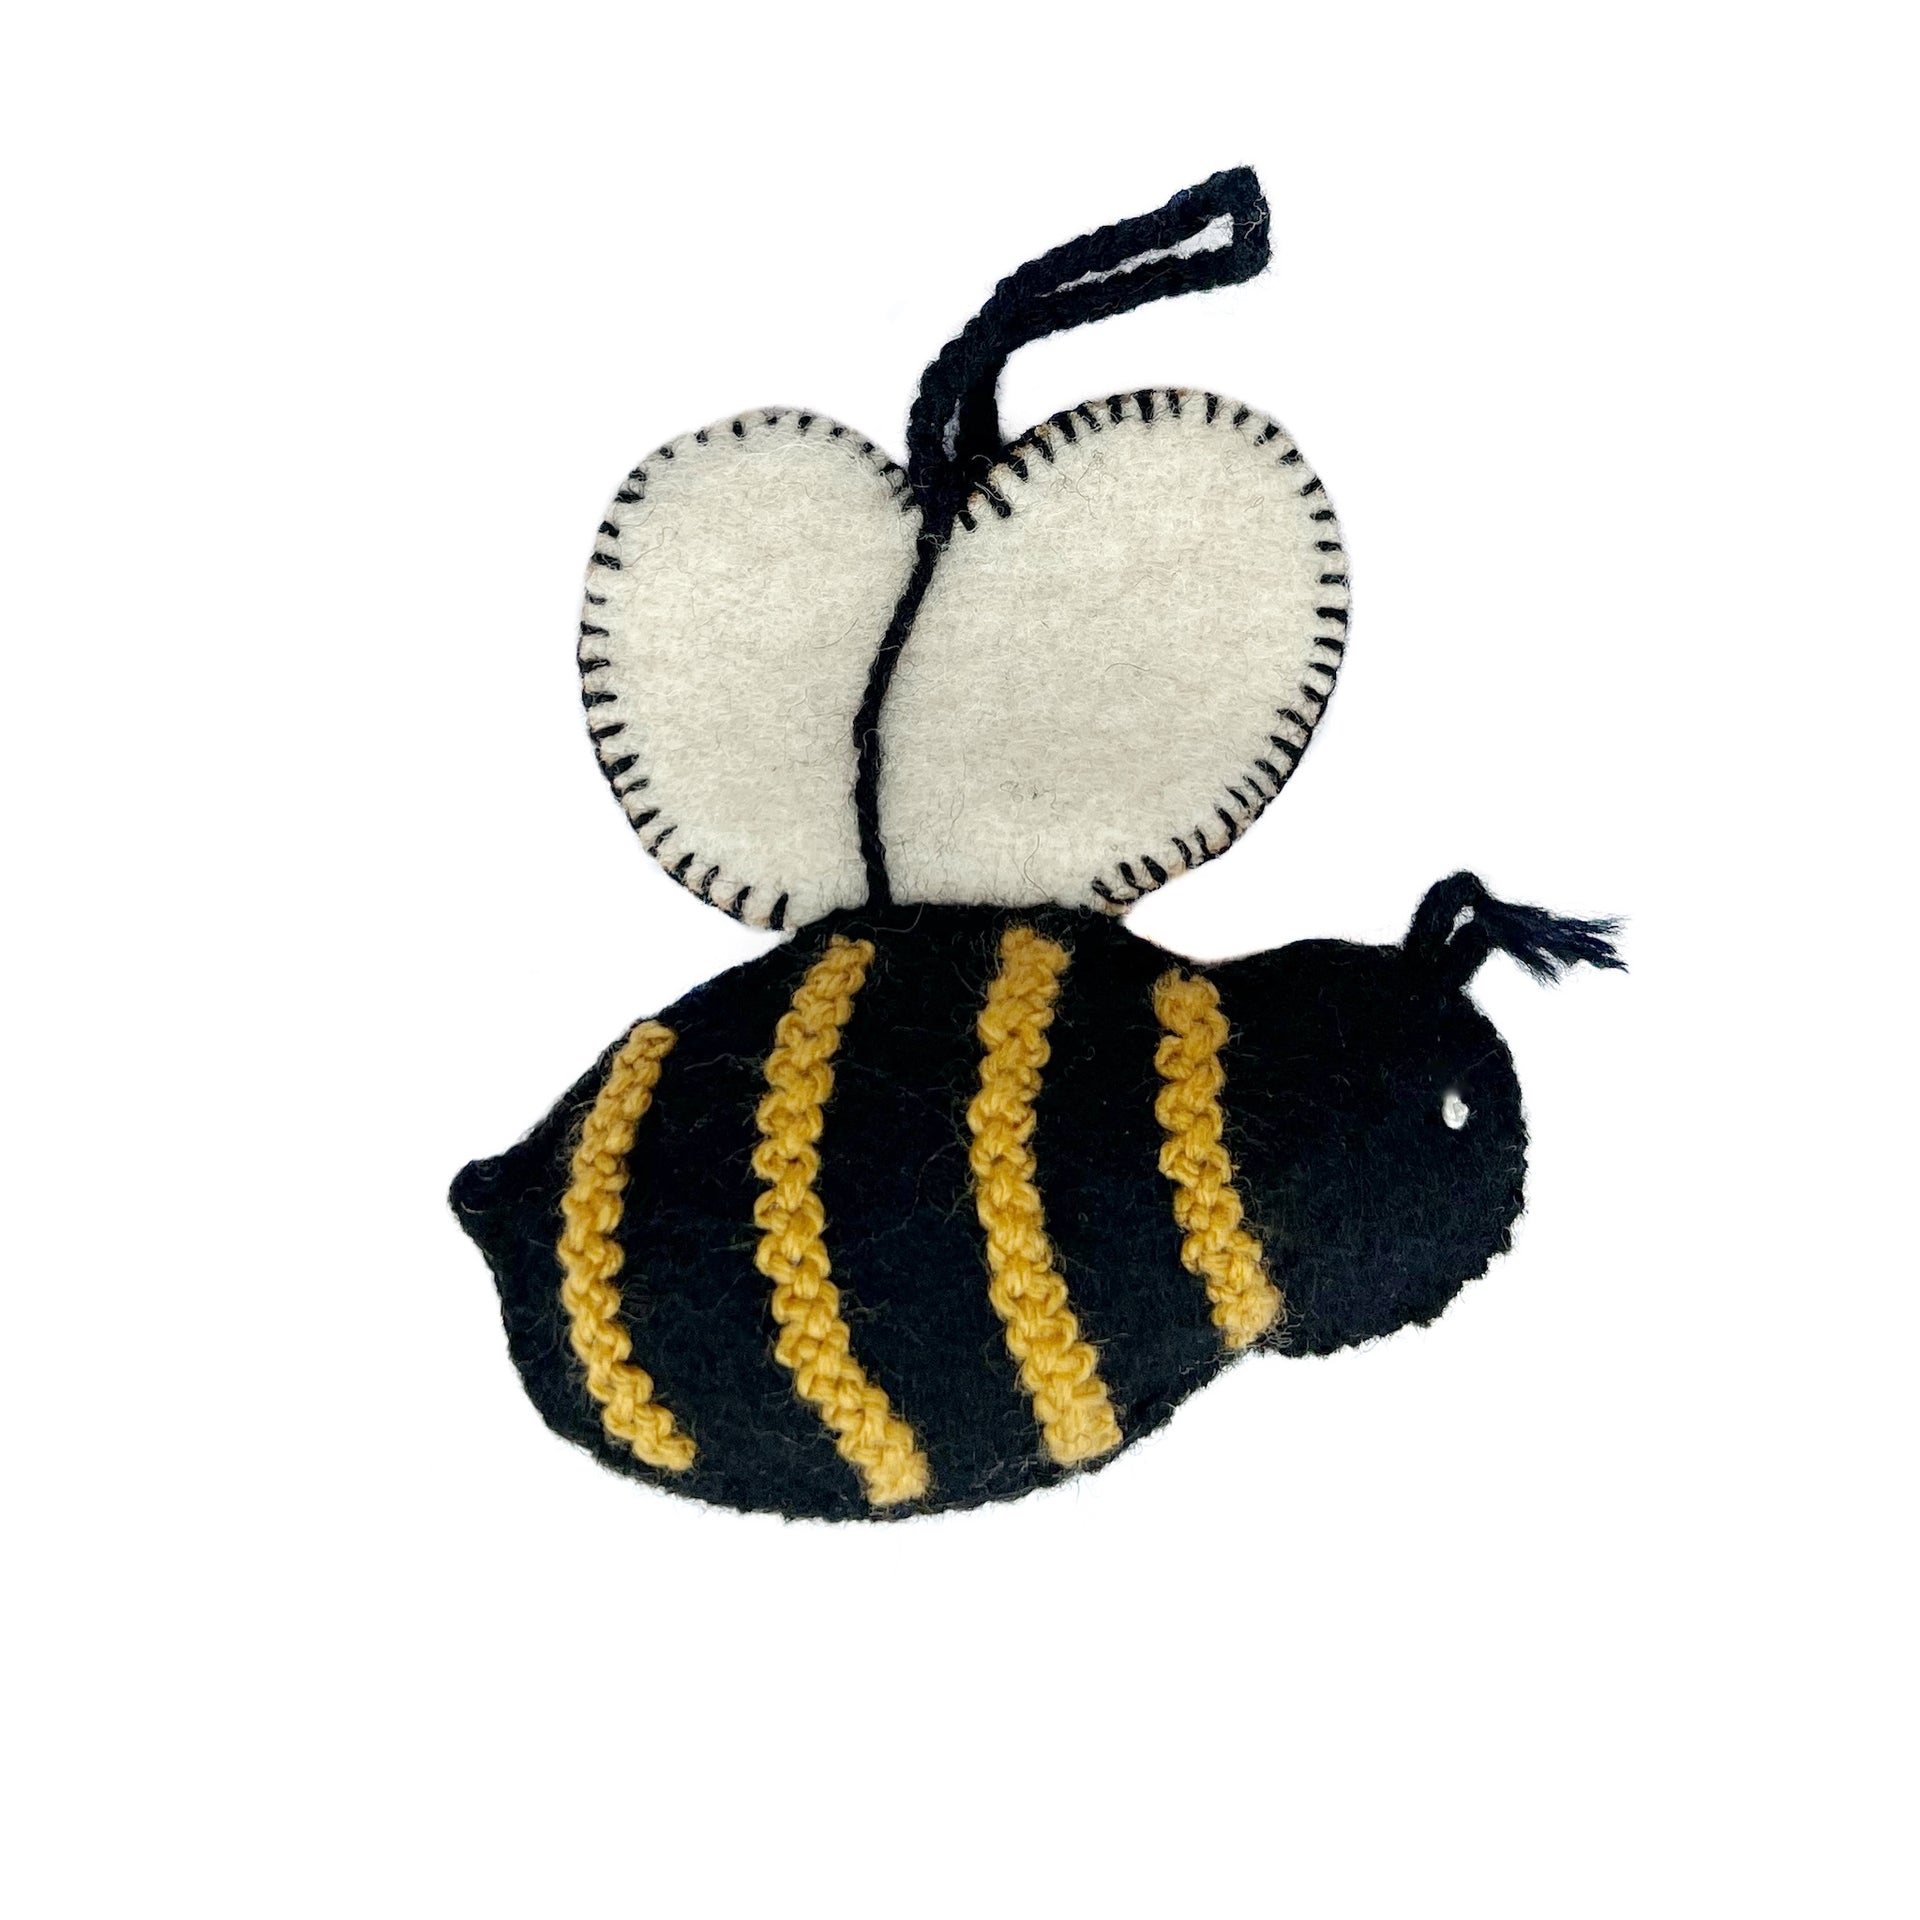 Handmade embroidered bee ornament flying with wings up.